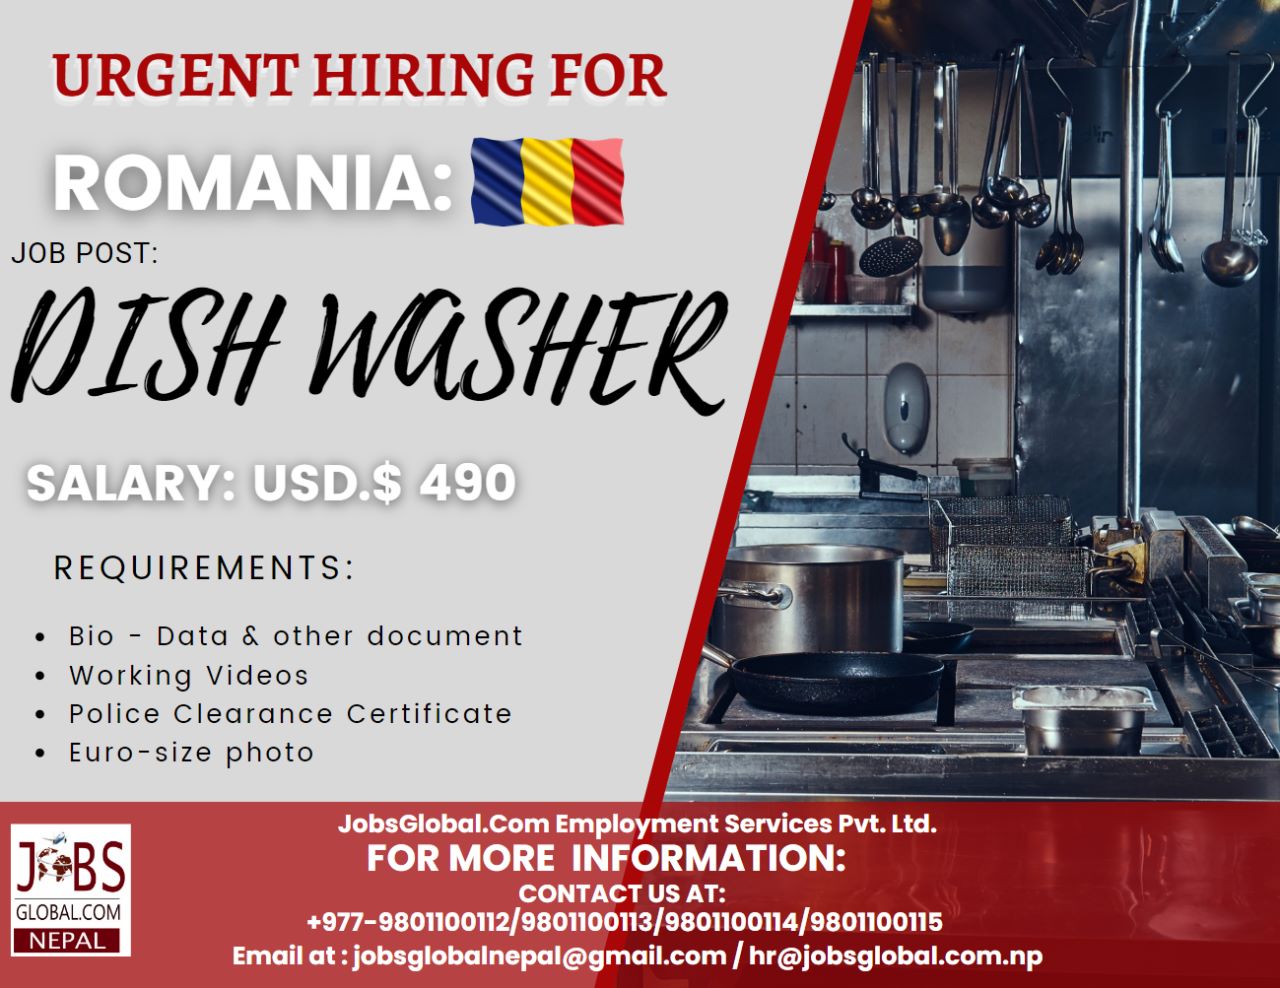 Job Demand From Romania, Job Vacancy for Romania From JobsGlobal. Com Employment NEPAL - Disk Washer job in Romania